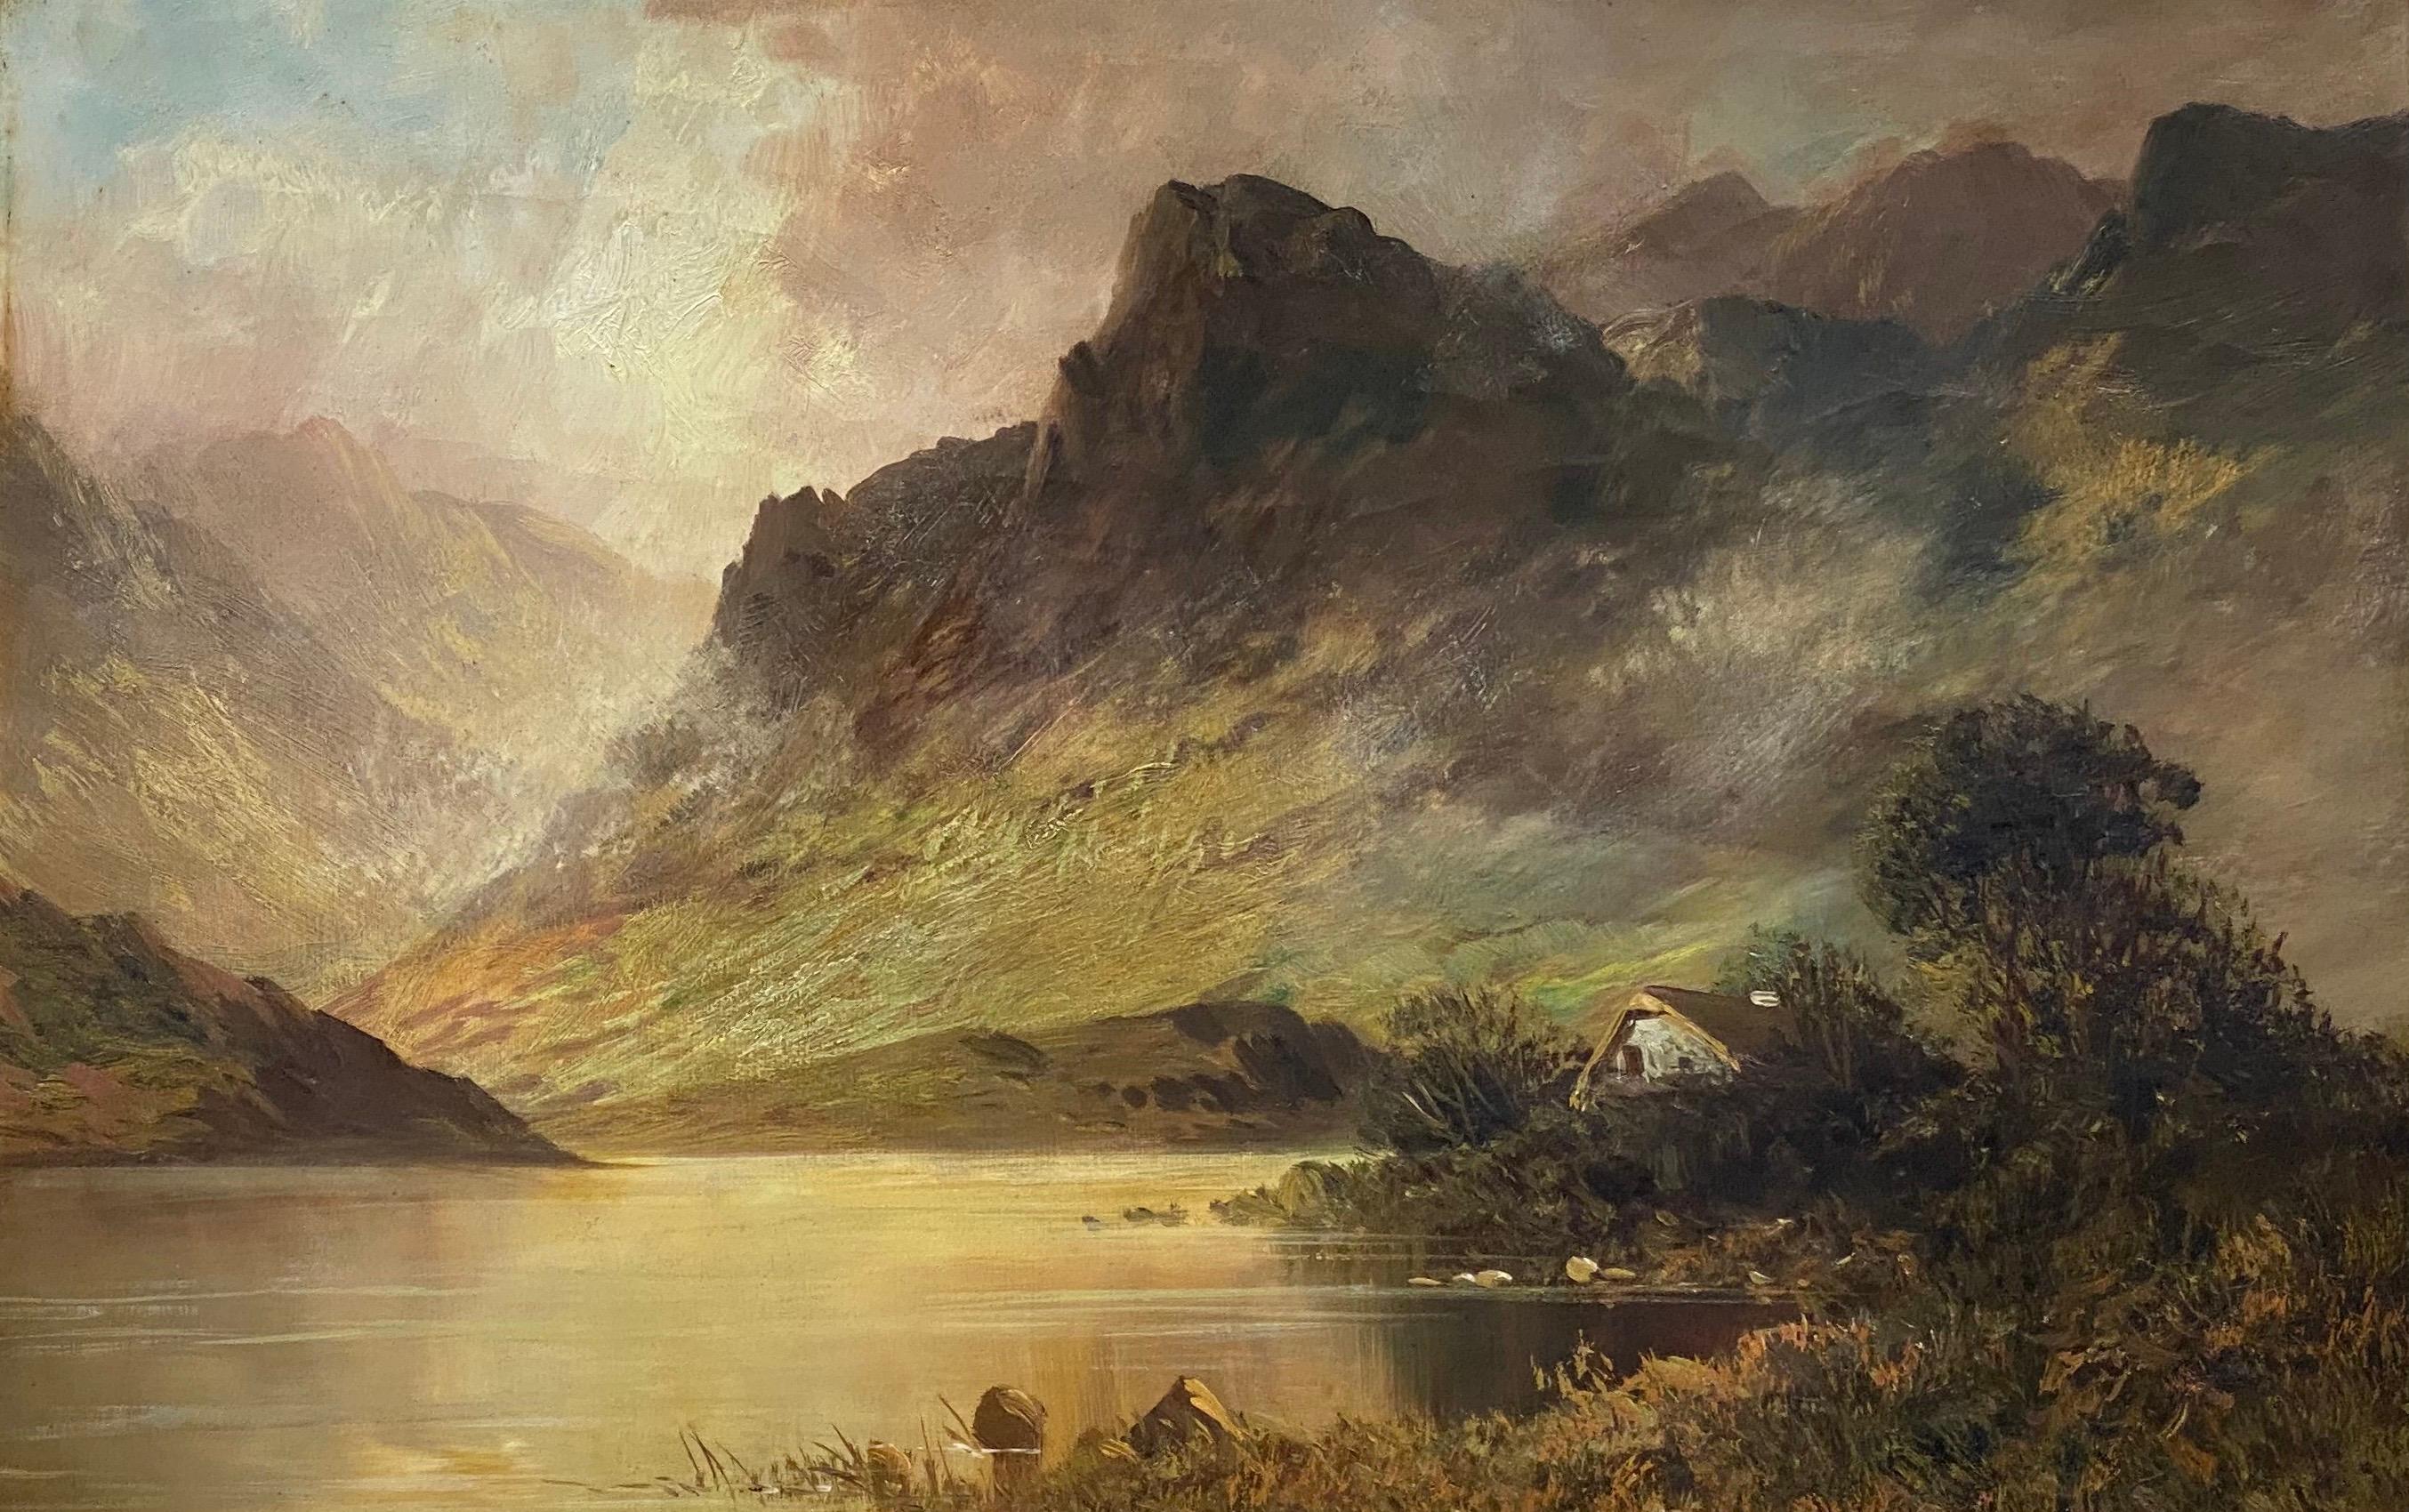 Francis E. Jamieson Landscape Painting - Antique Scottish Highlands Oil Painting Dunkeld River Tay Perthshire